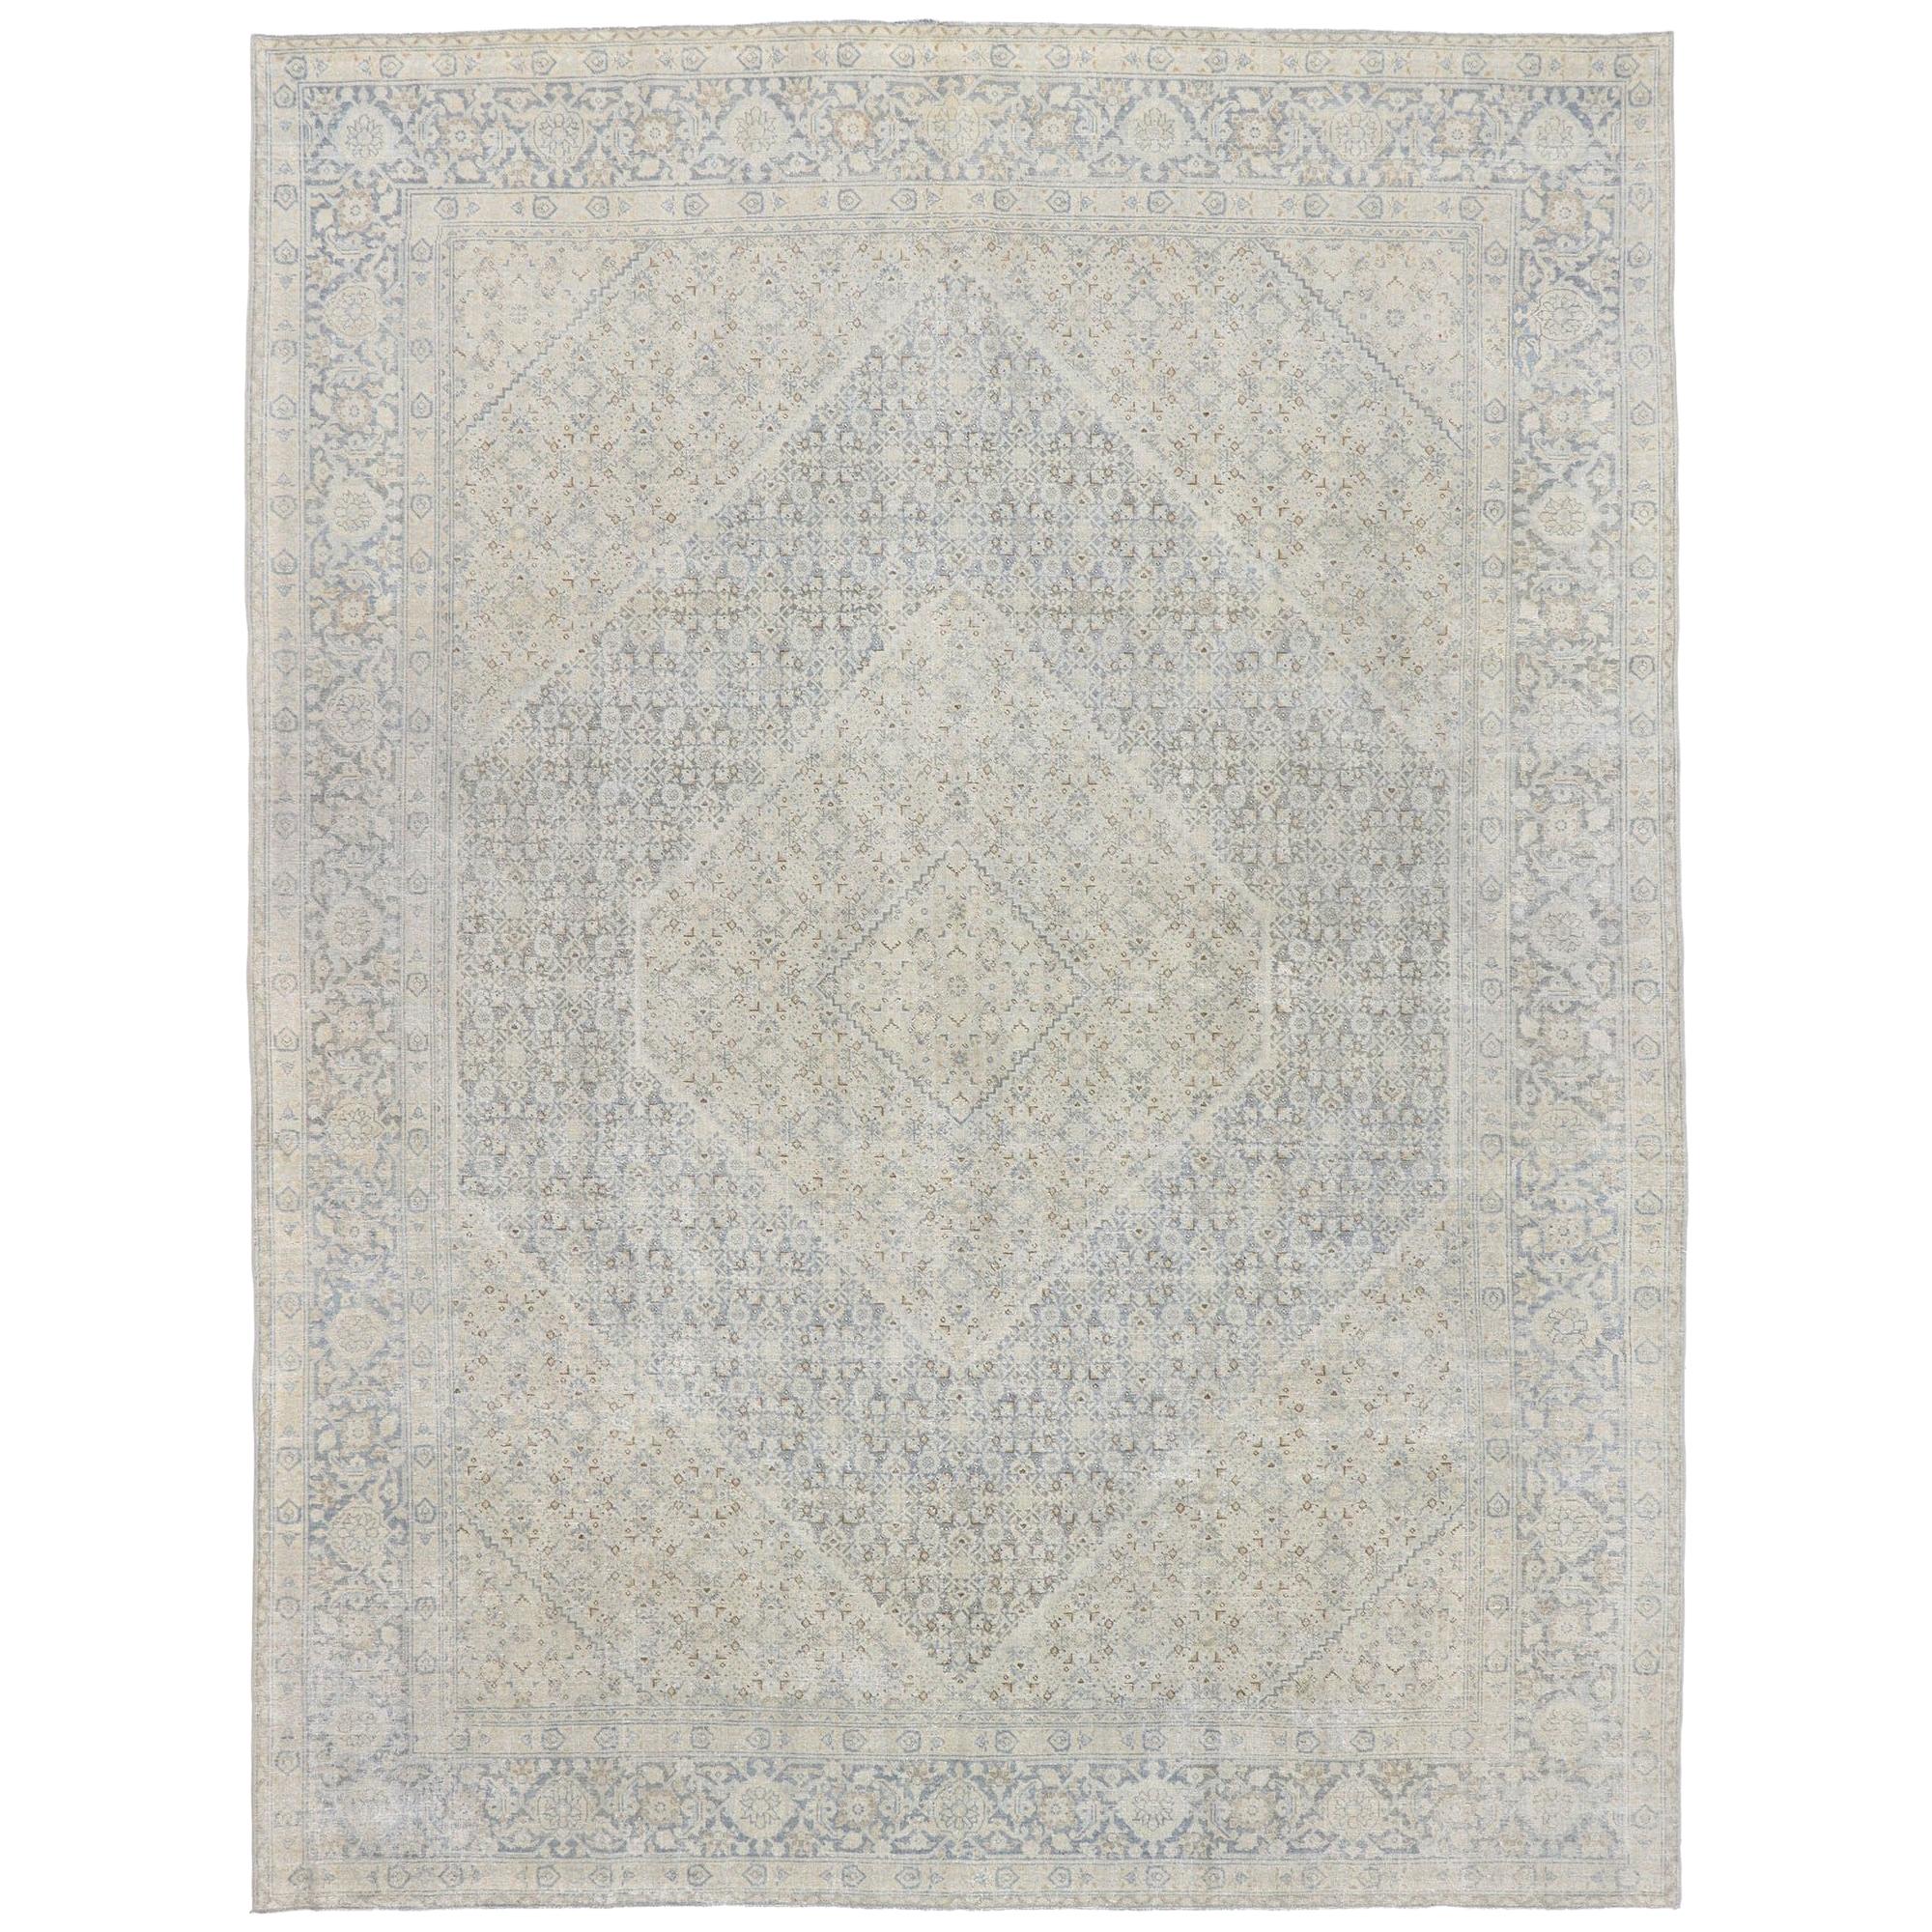 Distressed Vintage Persian Mahi Tabriz Rug with English Country Cottage Style For Sale